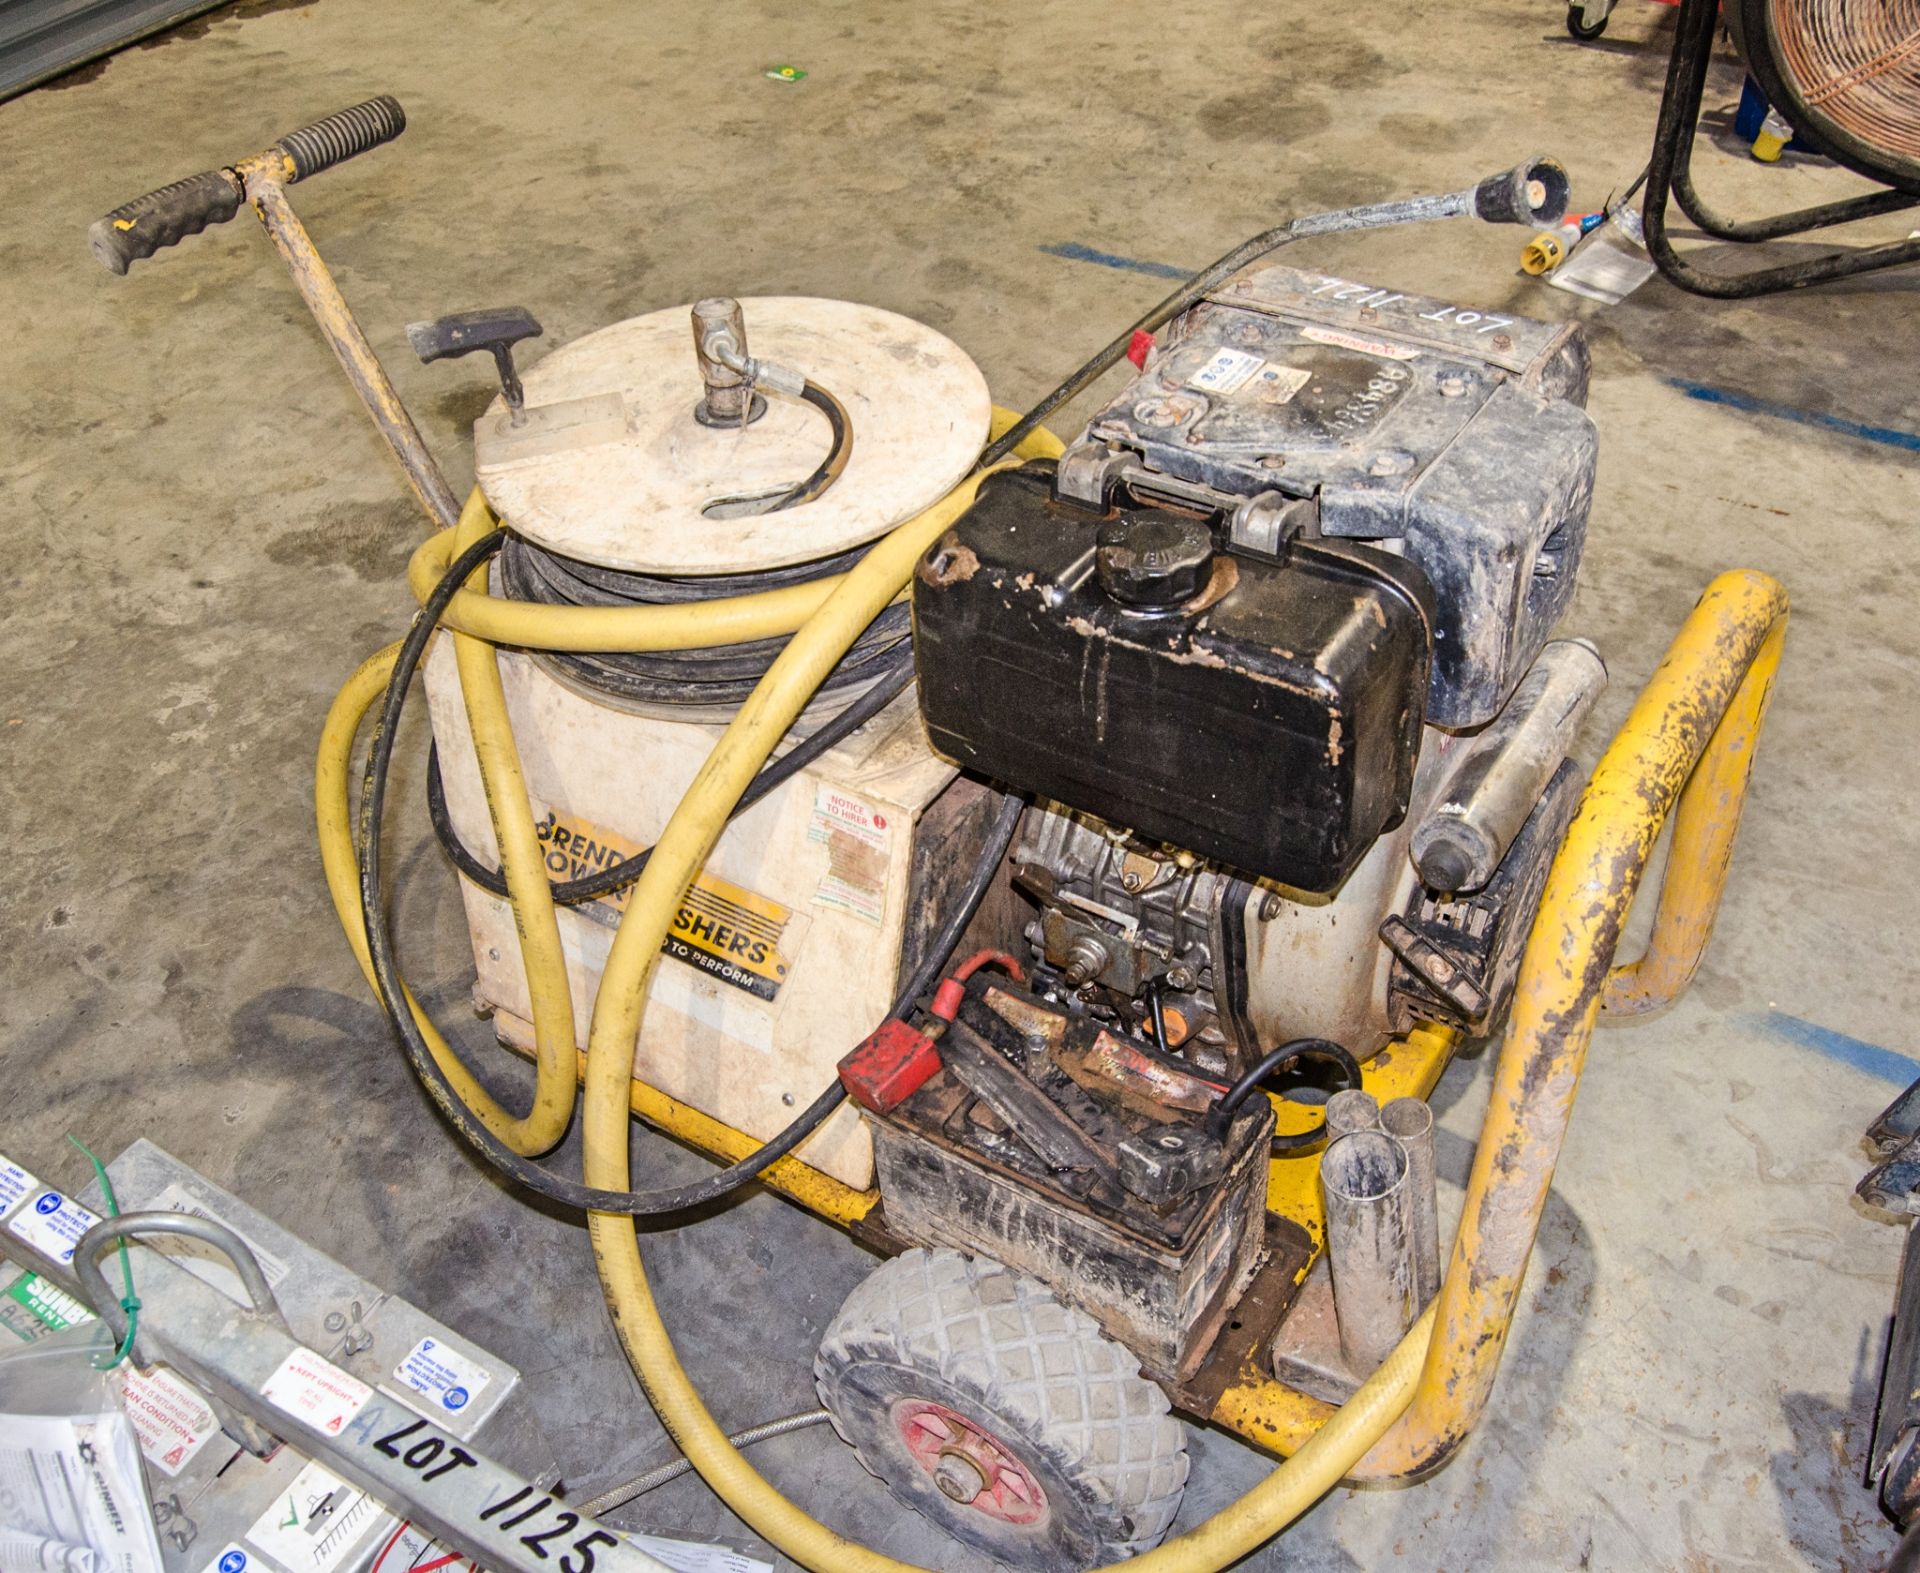 Brendon diesel driven pressure washer c/w hose and lance A848643 - Image 2 of 2